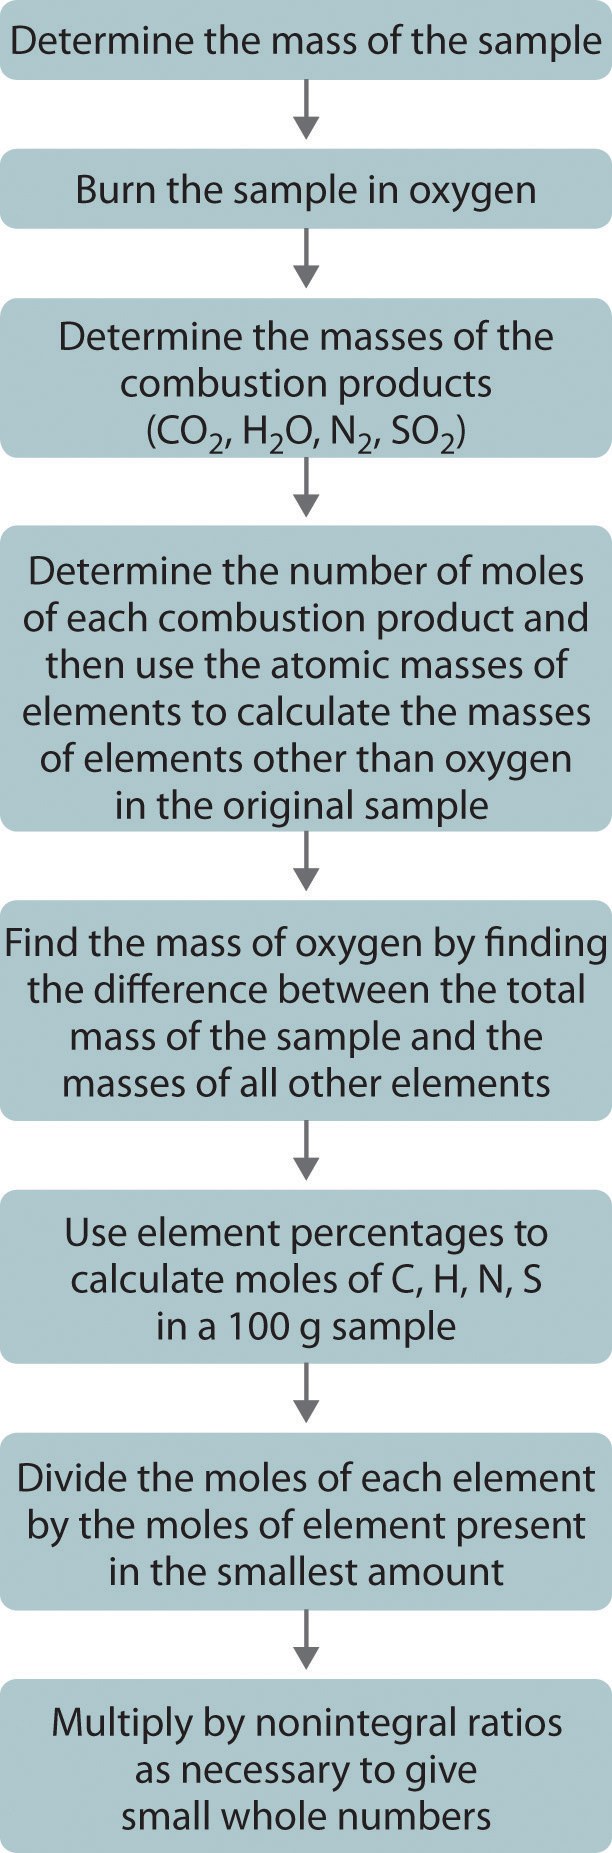 Flow chart that reads as: Determine the mass of the sample. Burn the sample in oxygen. Determine the masses of the combustion products. Determine the number of moles of each combustion product and then use the atomic masses of elements to calculate the masses of elements other than oxygen in the original sample. Find the mass of oxygen by finding the difference between the total mass of the sample and the masses of all other elements. Use element percentages to calculate moles of C, H, N, S in a 100 gram sample. Divide the moles of each element by the moles of element present in the smallest amount. Multiply by nonintegral ratios as necessary to give small whole numbers.